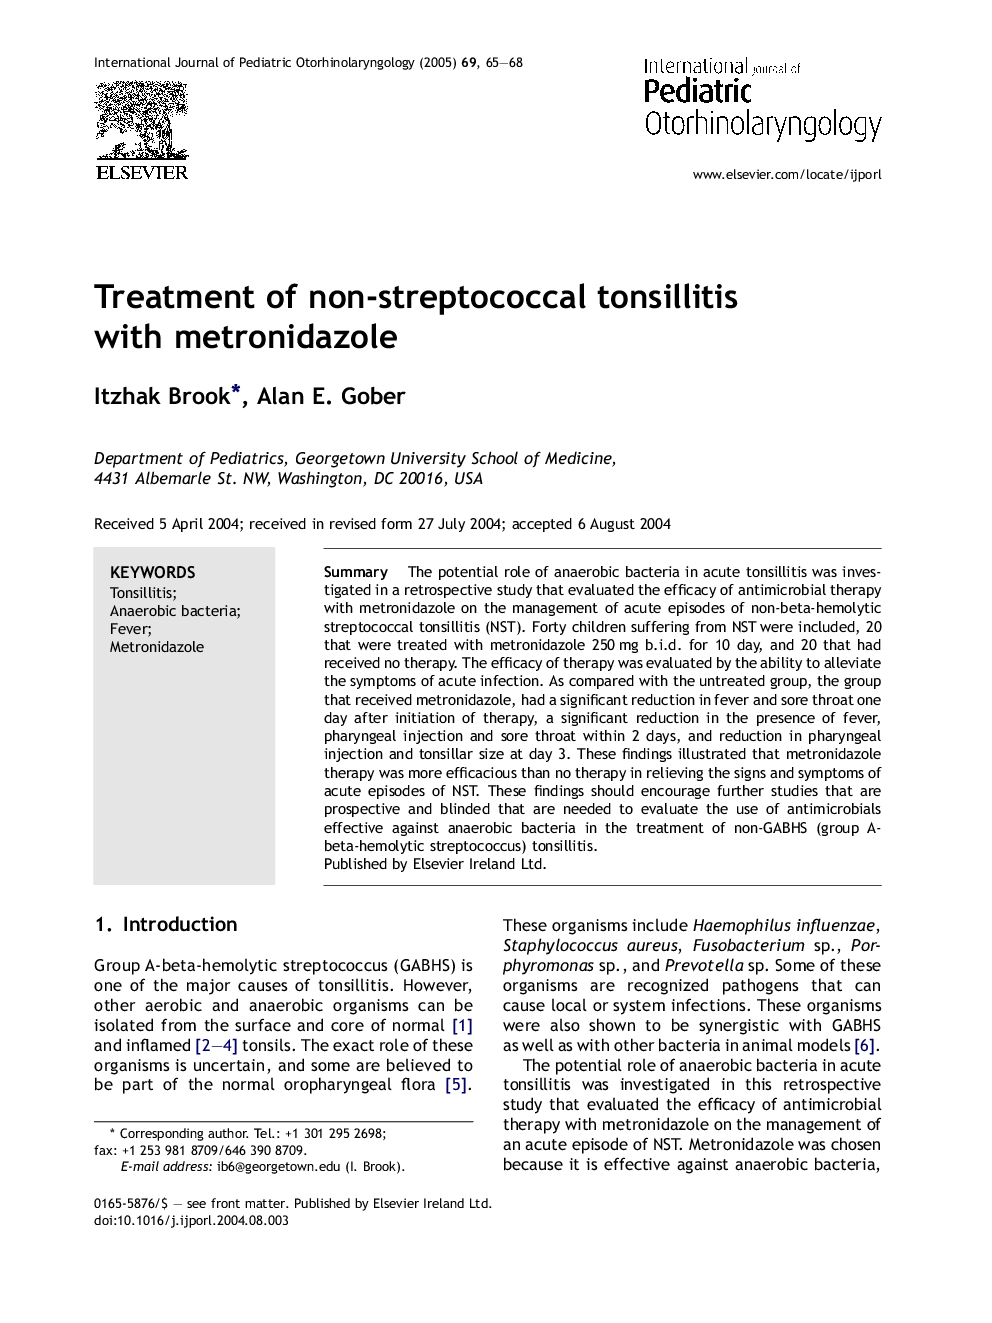 Treatment of non-streptococcal tonsillitis with metronidazole